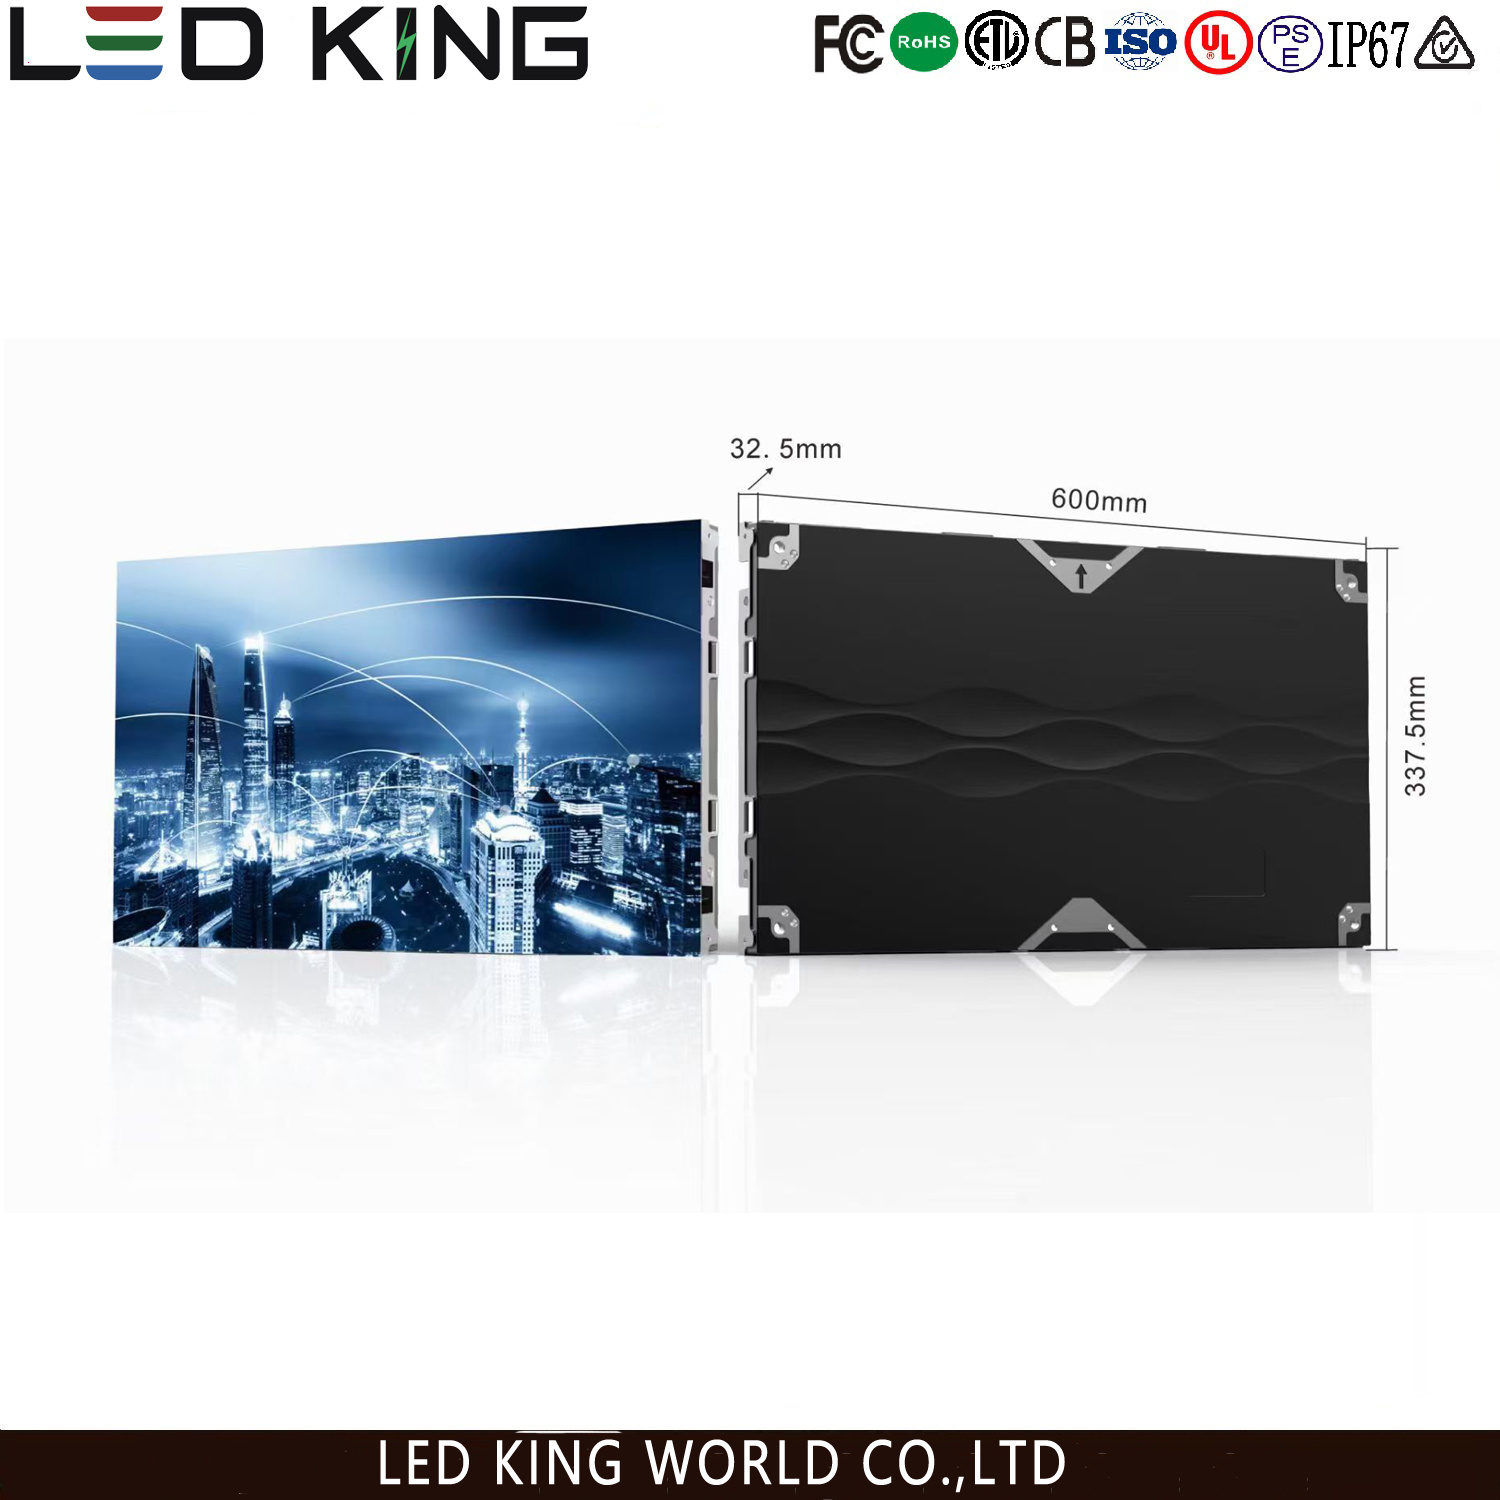 HK-H Series P1.923 Broadcasting HD LED Video Display for TV Station and Conference Room